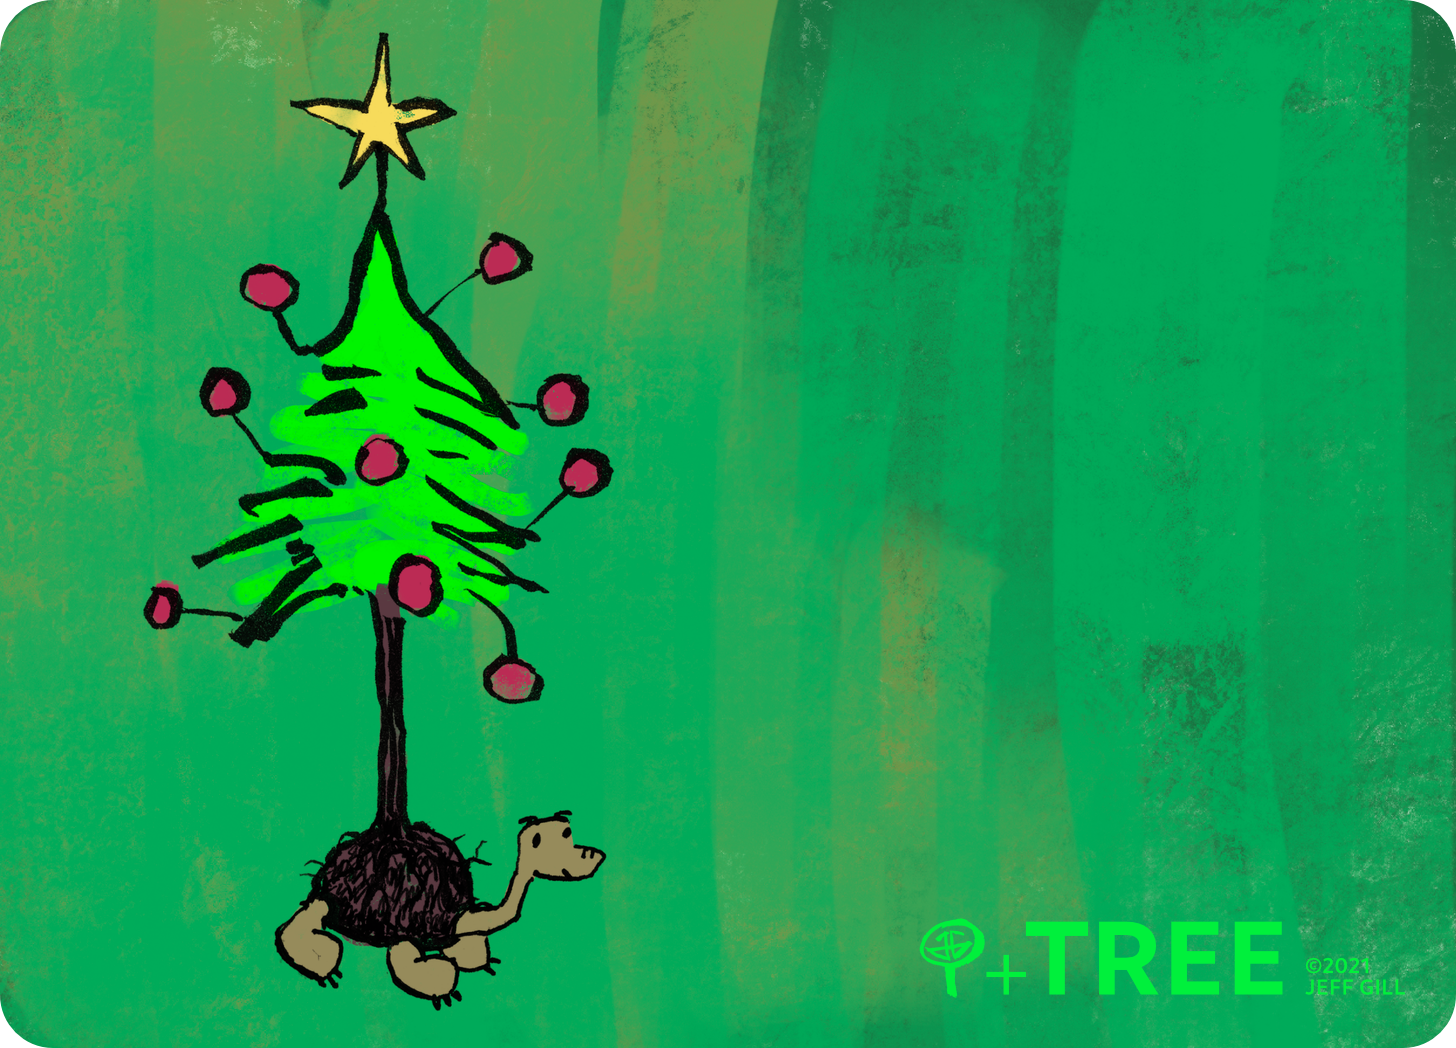 An illustration of a Christmas tree on the back of a tortoise